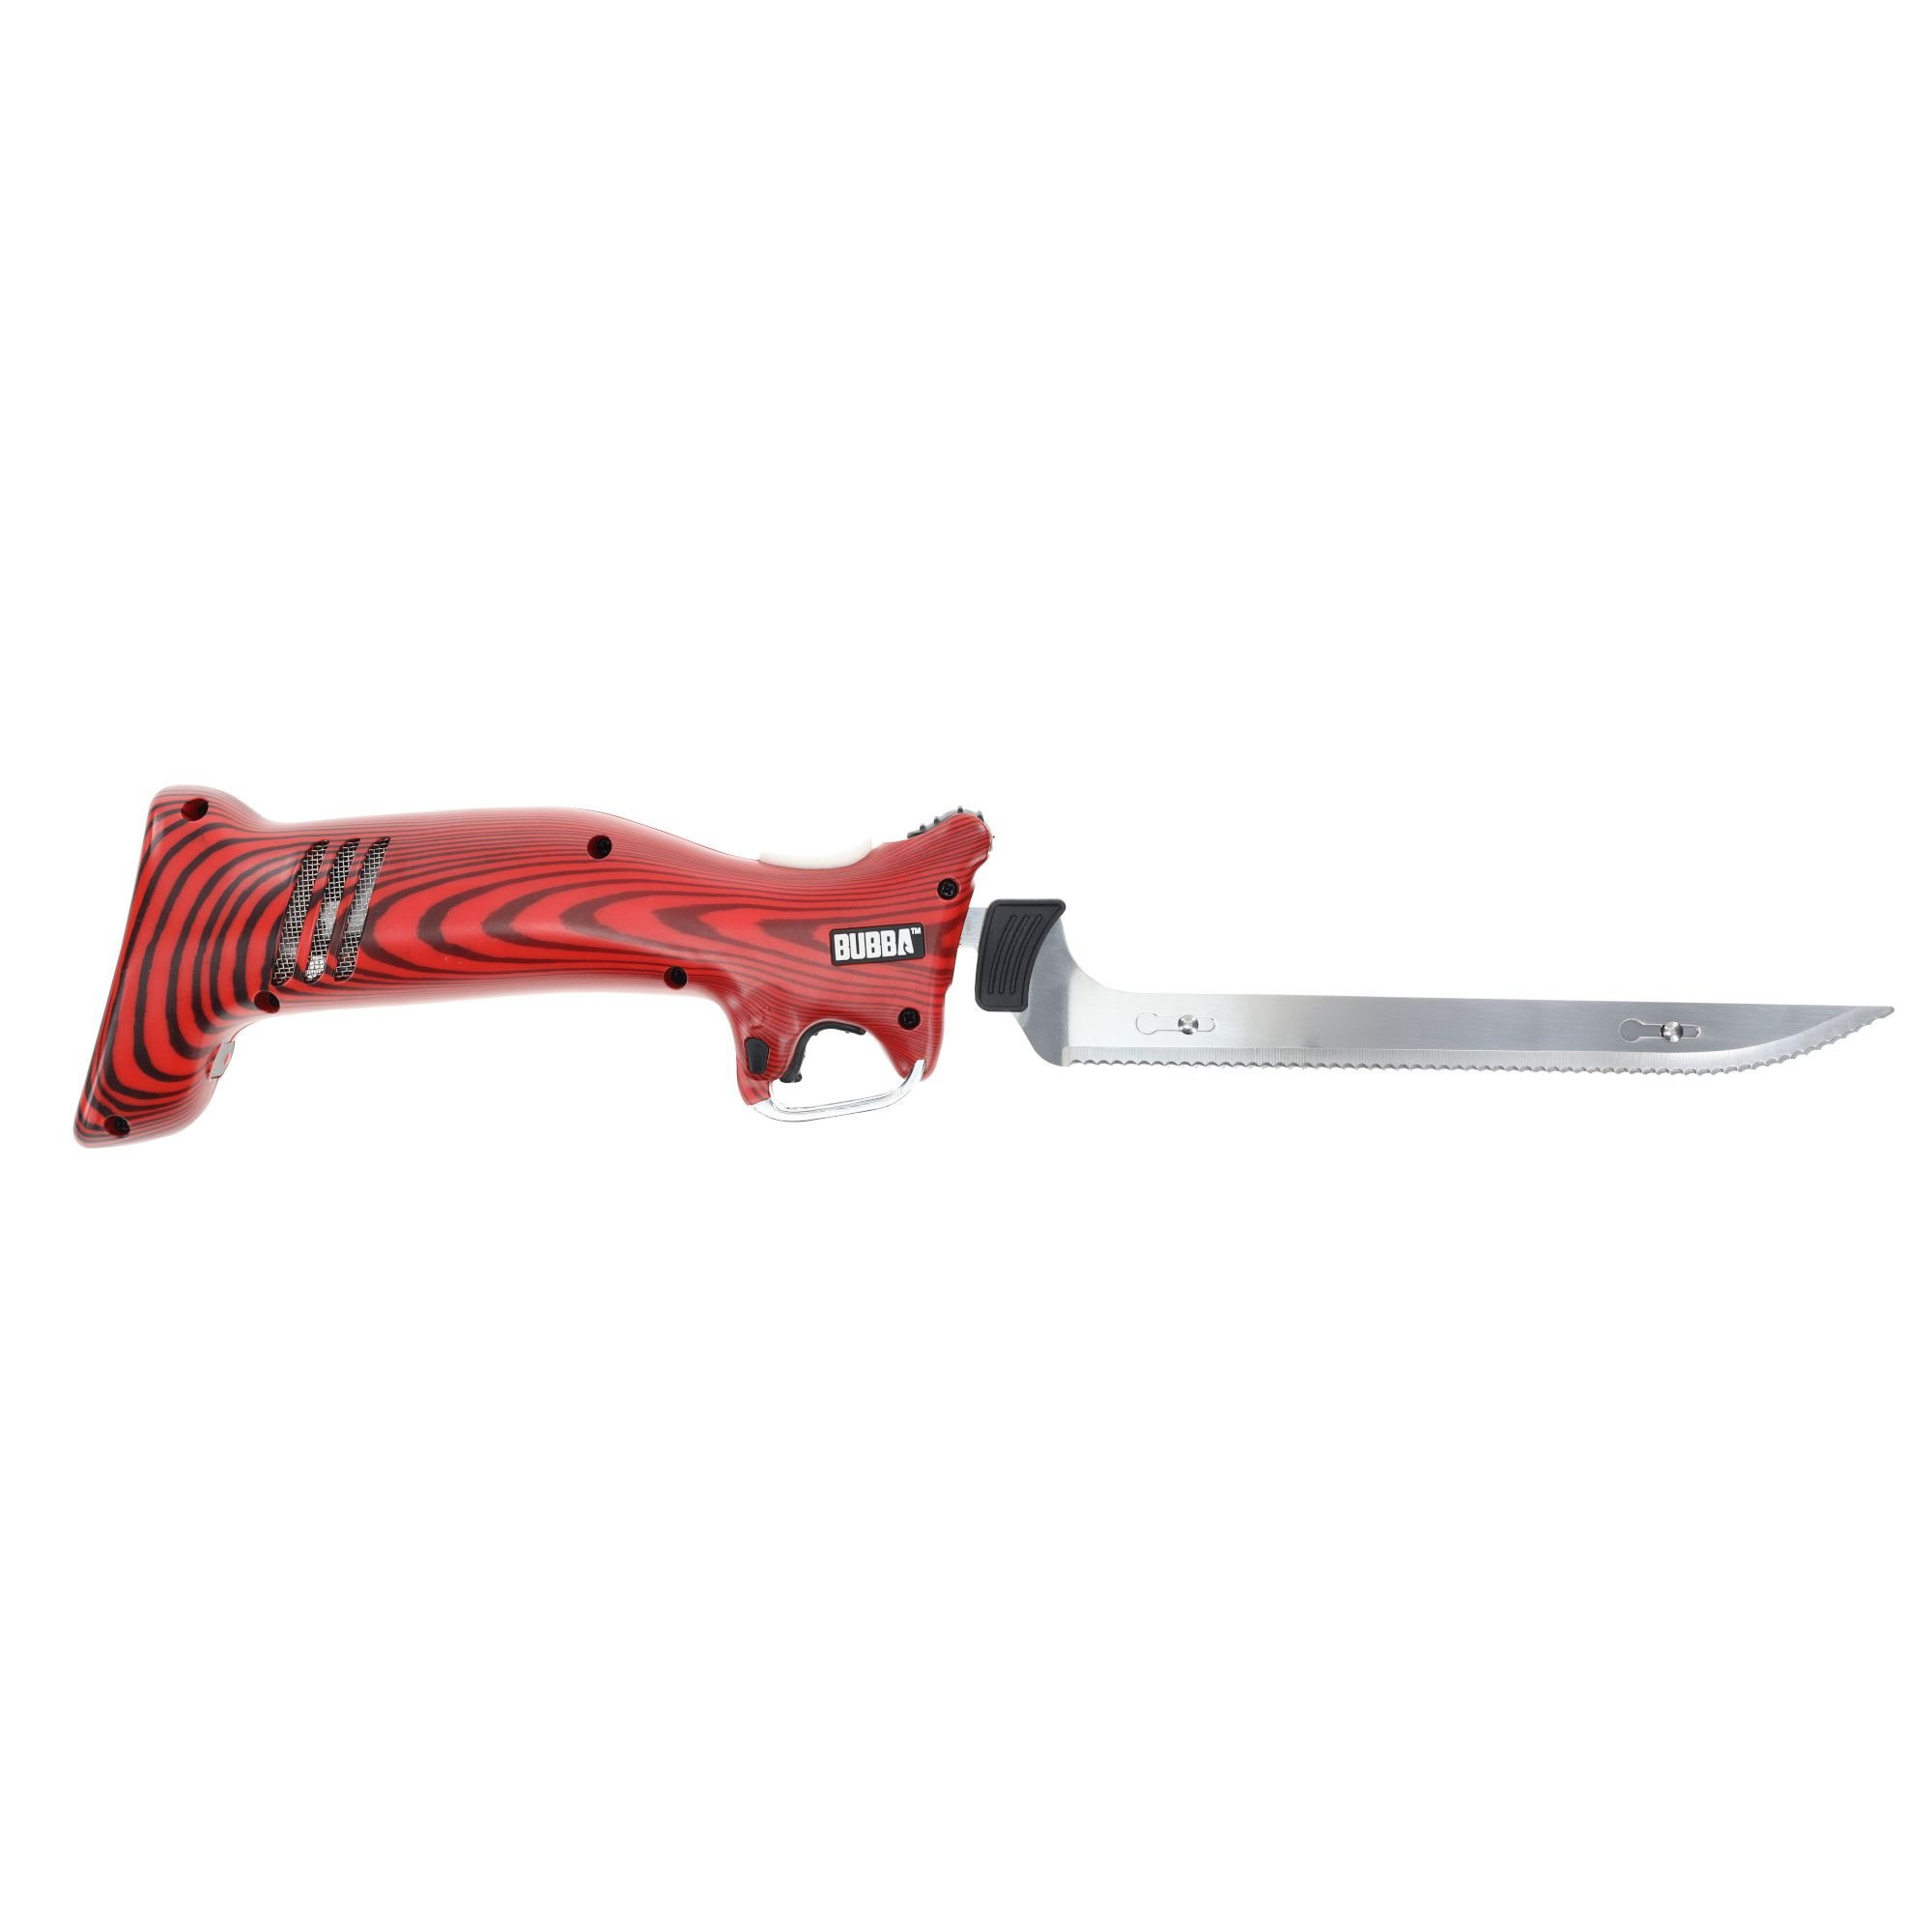 https://www.bubba.com/on/demandware.static/-/Sites-bubbablade-master/default/dw786a558b/images/1135883/1135883_Kitchen-Series-Electric-Knife-Set_4.jpg